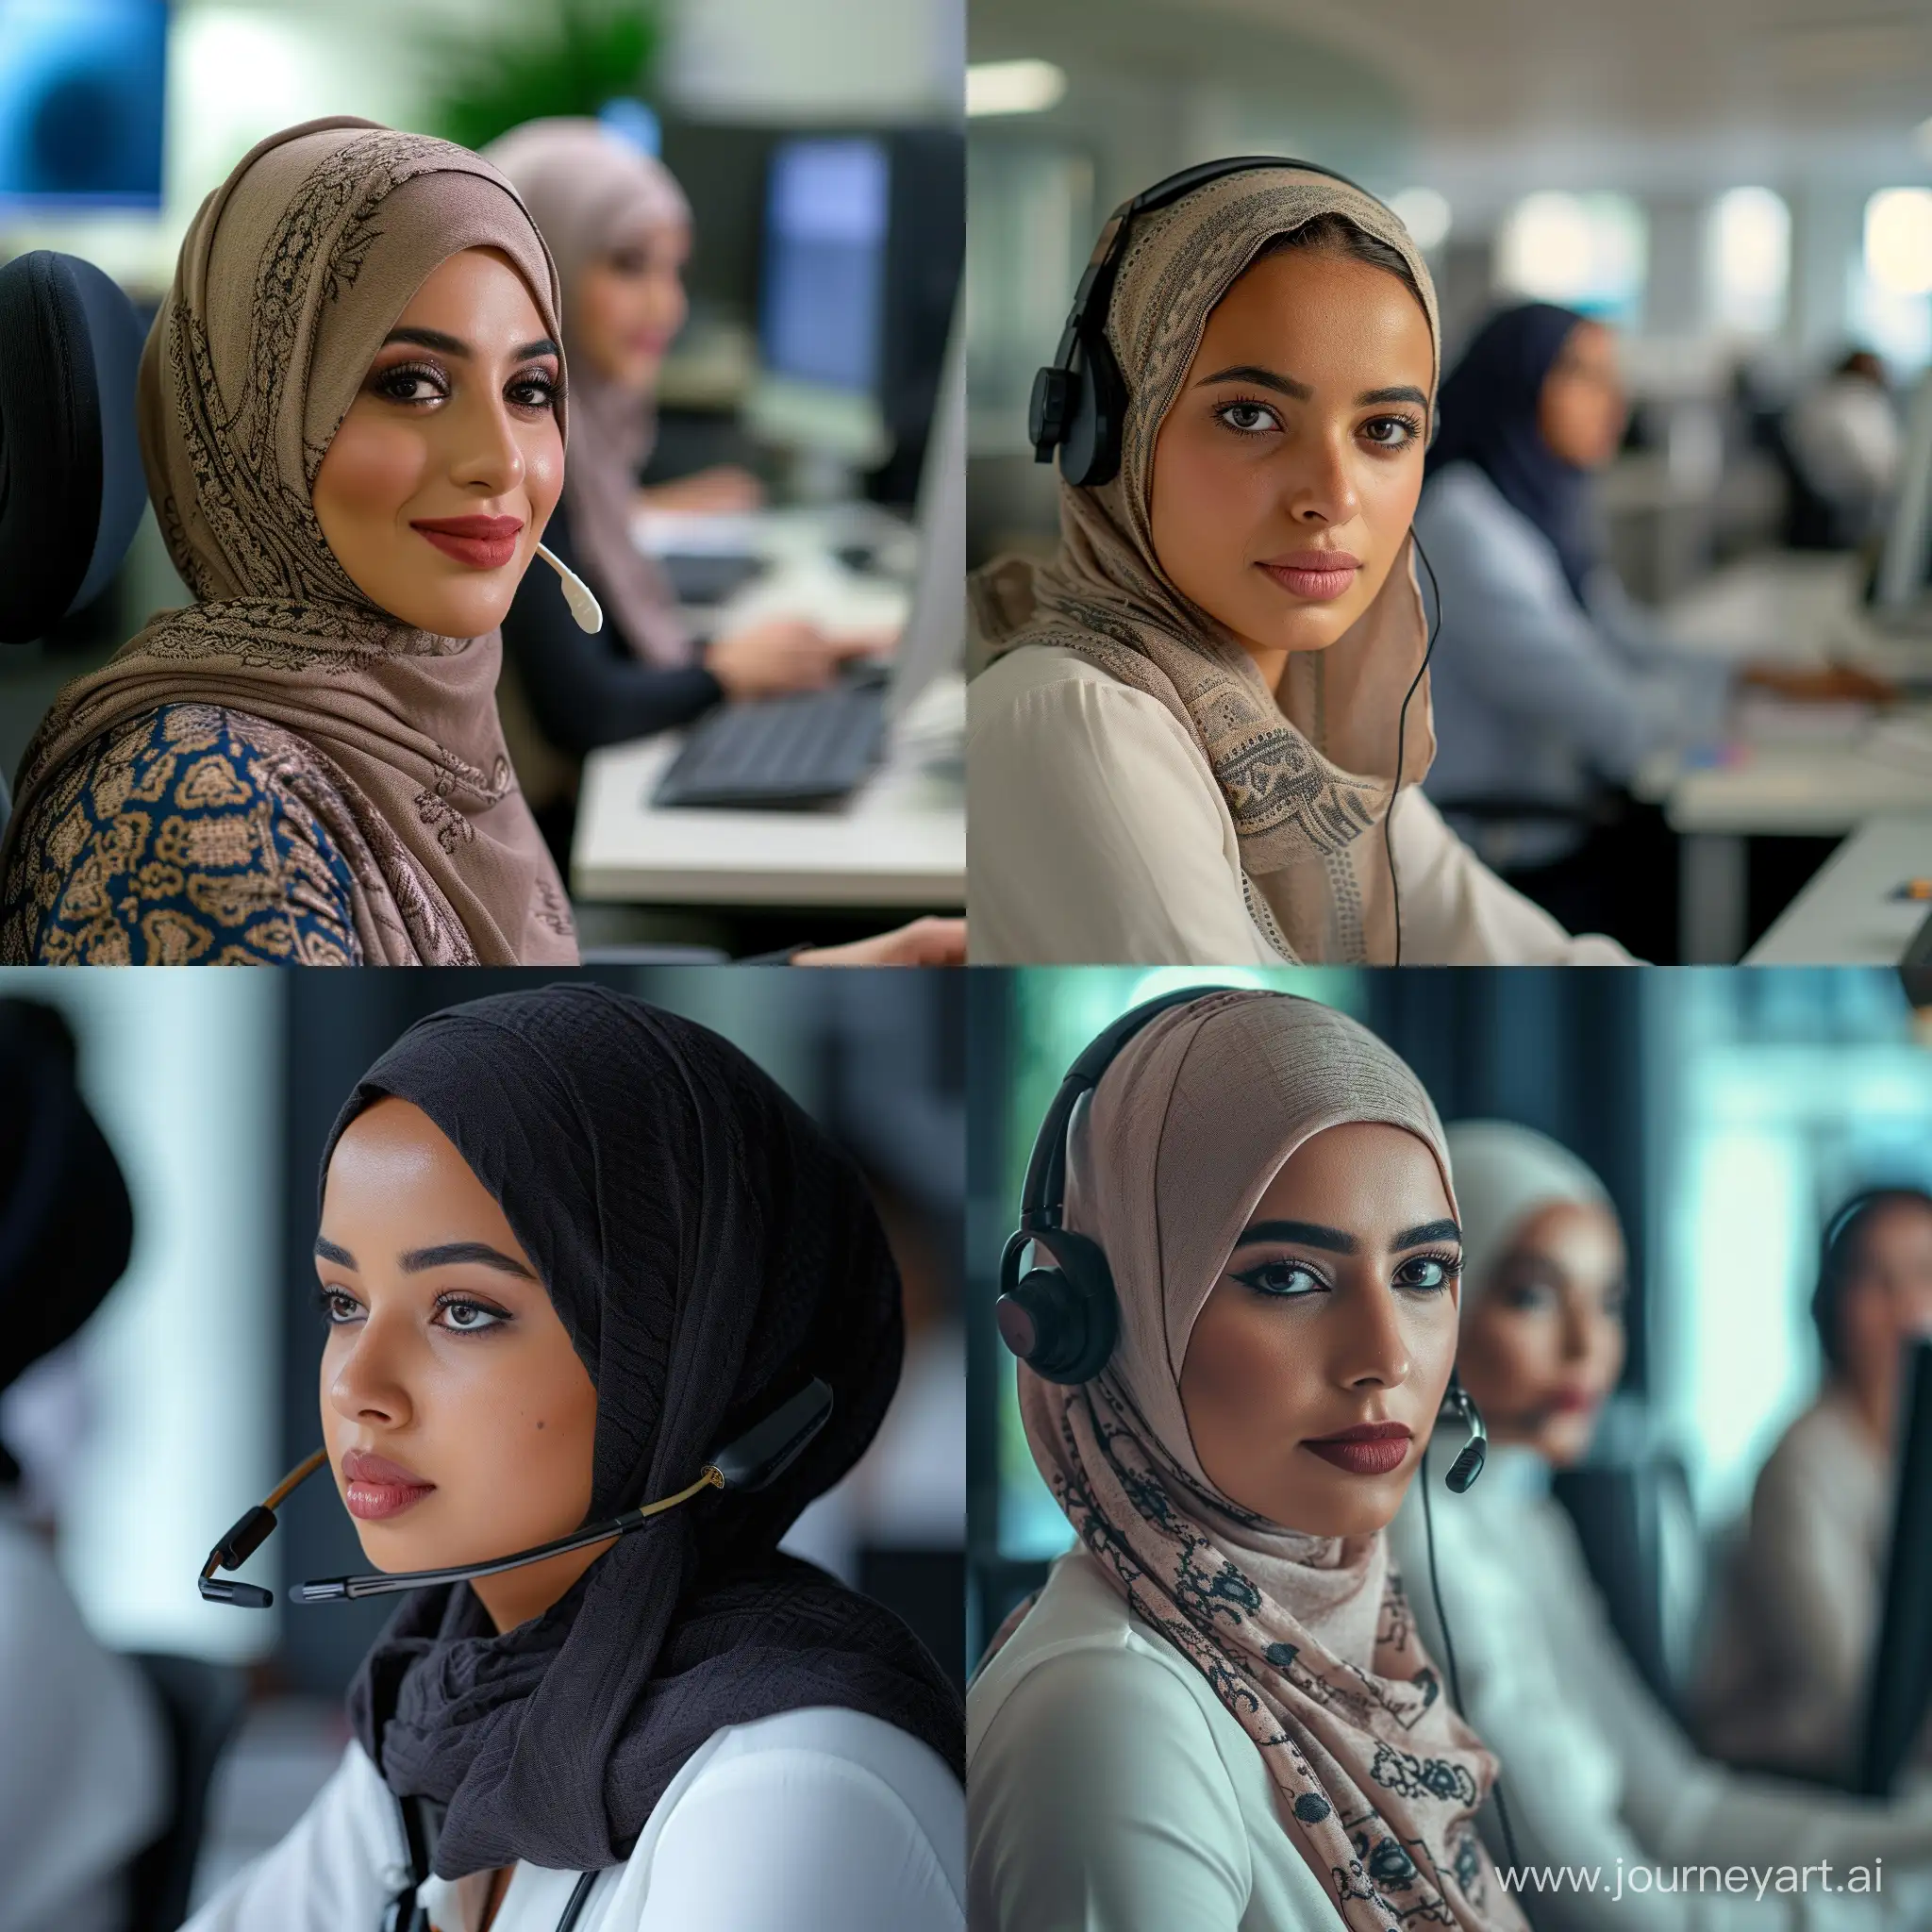 Generate image, very realistic image of algerian looking women in office that represent customers service